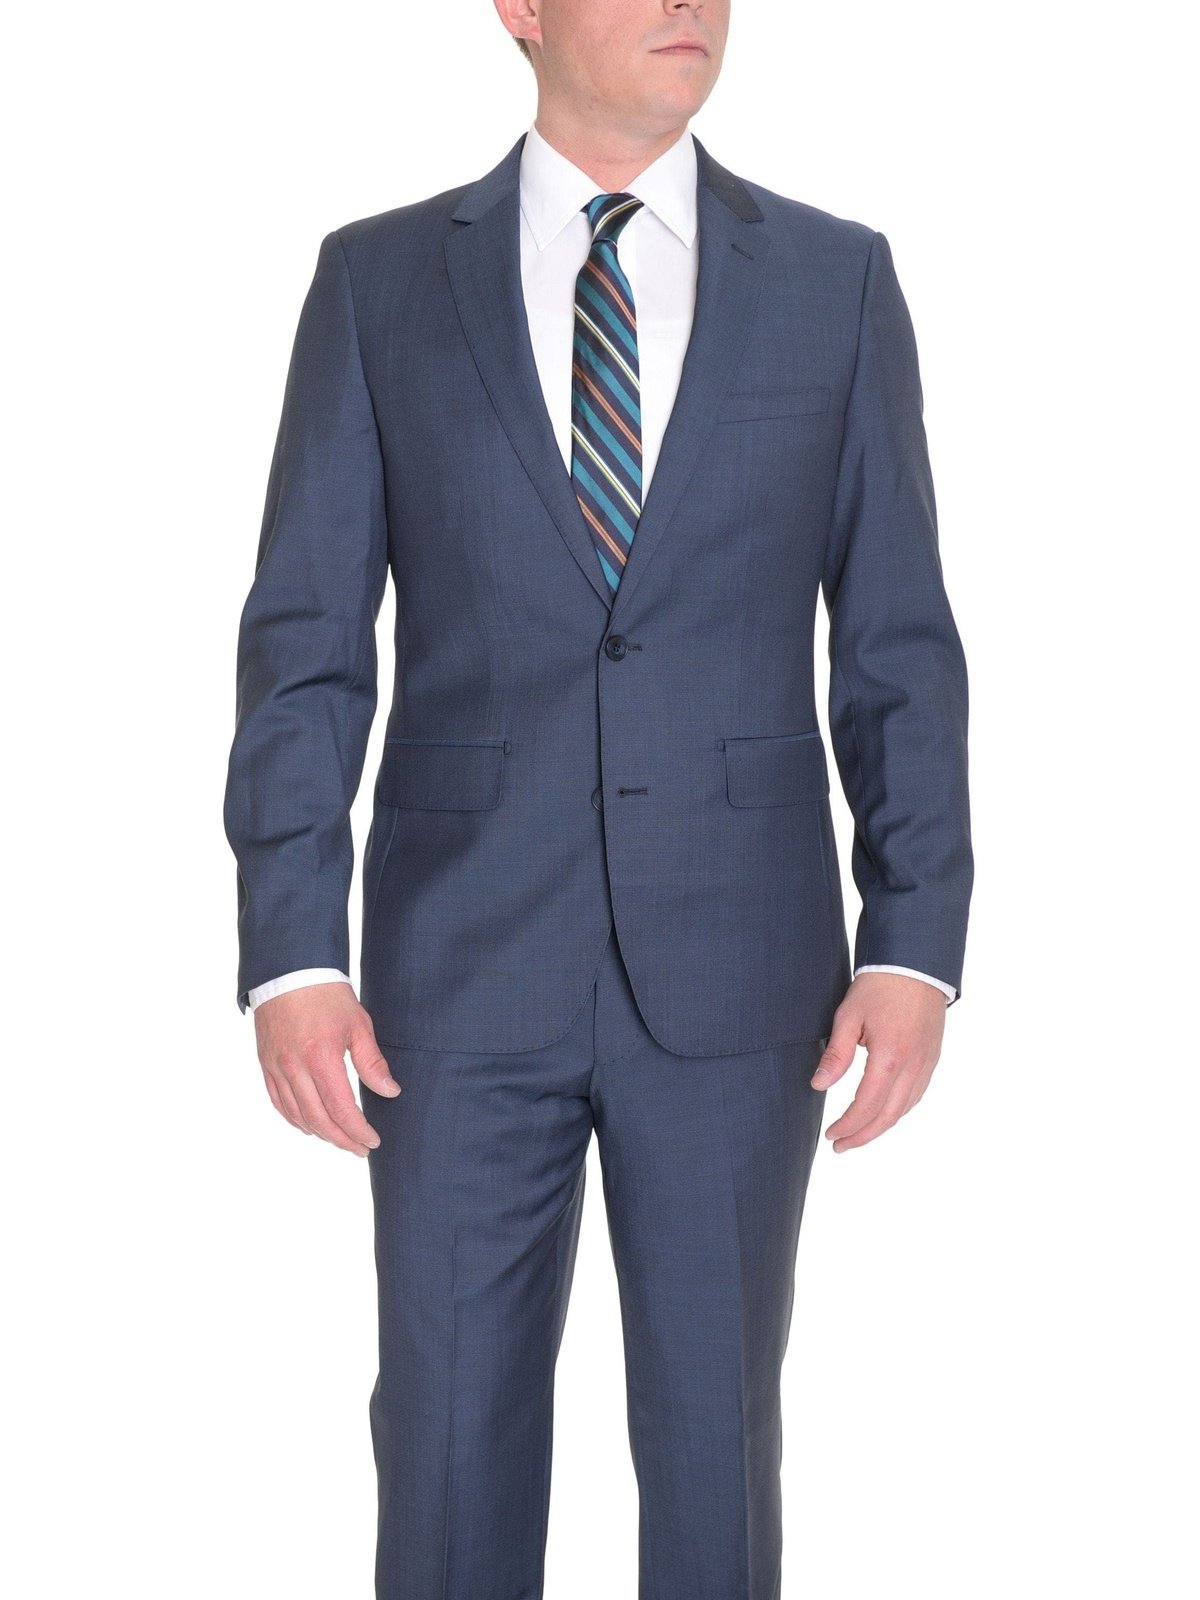 London Fog TWO PIECE SUITS Slim Fit Solid Heather Blue Two Button Wool Suit